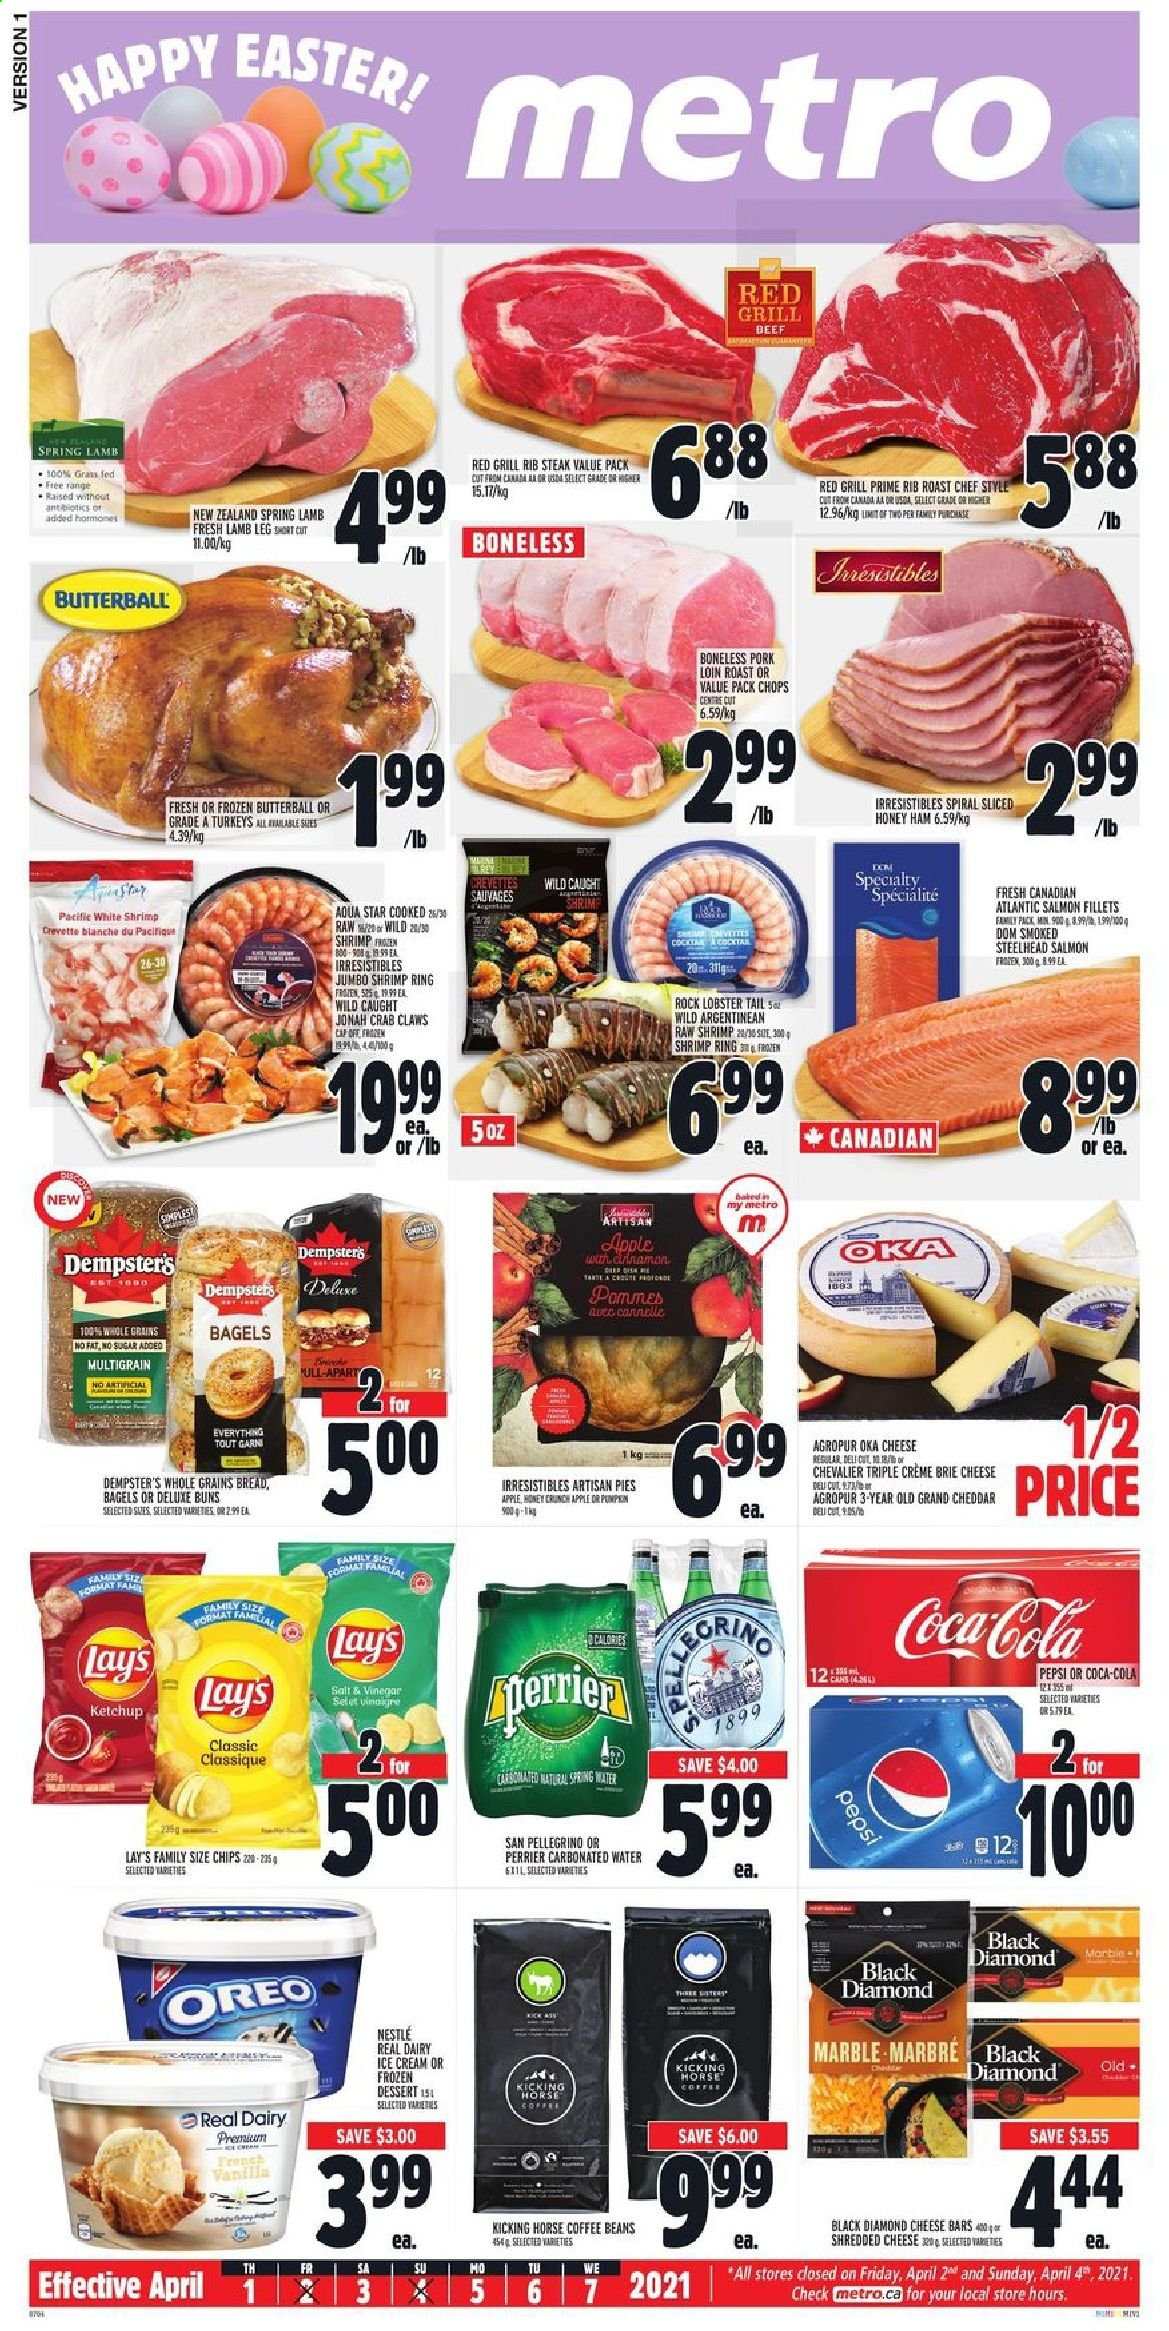 thumbnail - Metro Flyer - April 01, 2021 - April 07, 2021 - Sales products - bagels, buns, lobster, salmon, salmon fillet, crab, lobster tail, shrimps, Butterball, ham, cheese, brie, ice cream, Lay’s, Coca-Cola, Pepsi, Perrier, San Pellegrino, coffee beans, pork loin, pork meat, lamb meat, lamb leg, pen, Oreo, Nestlé, steak. Page 1.